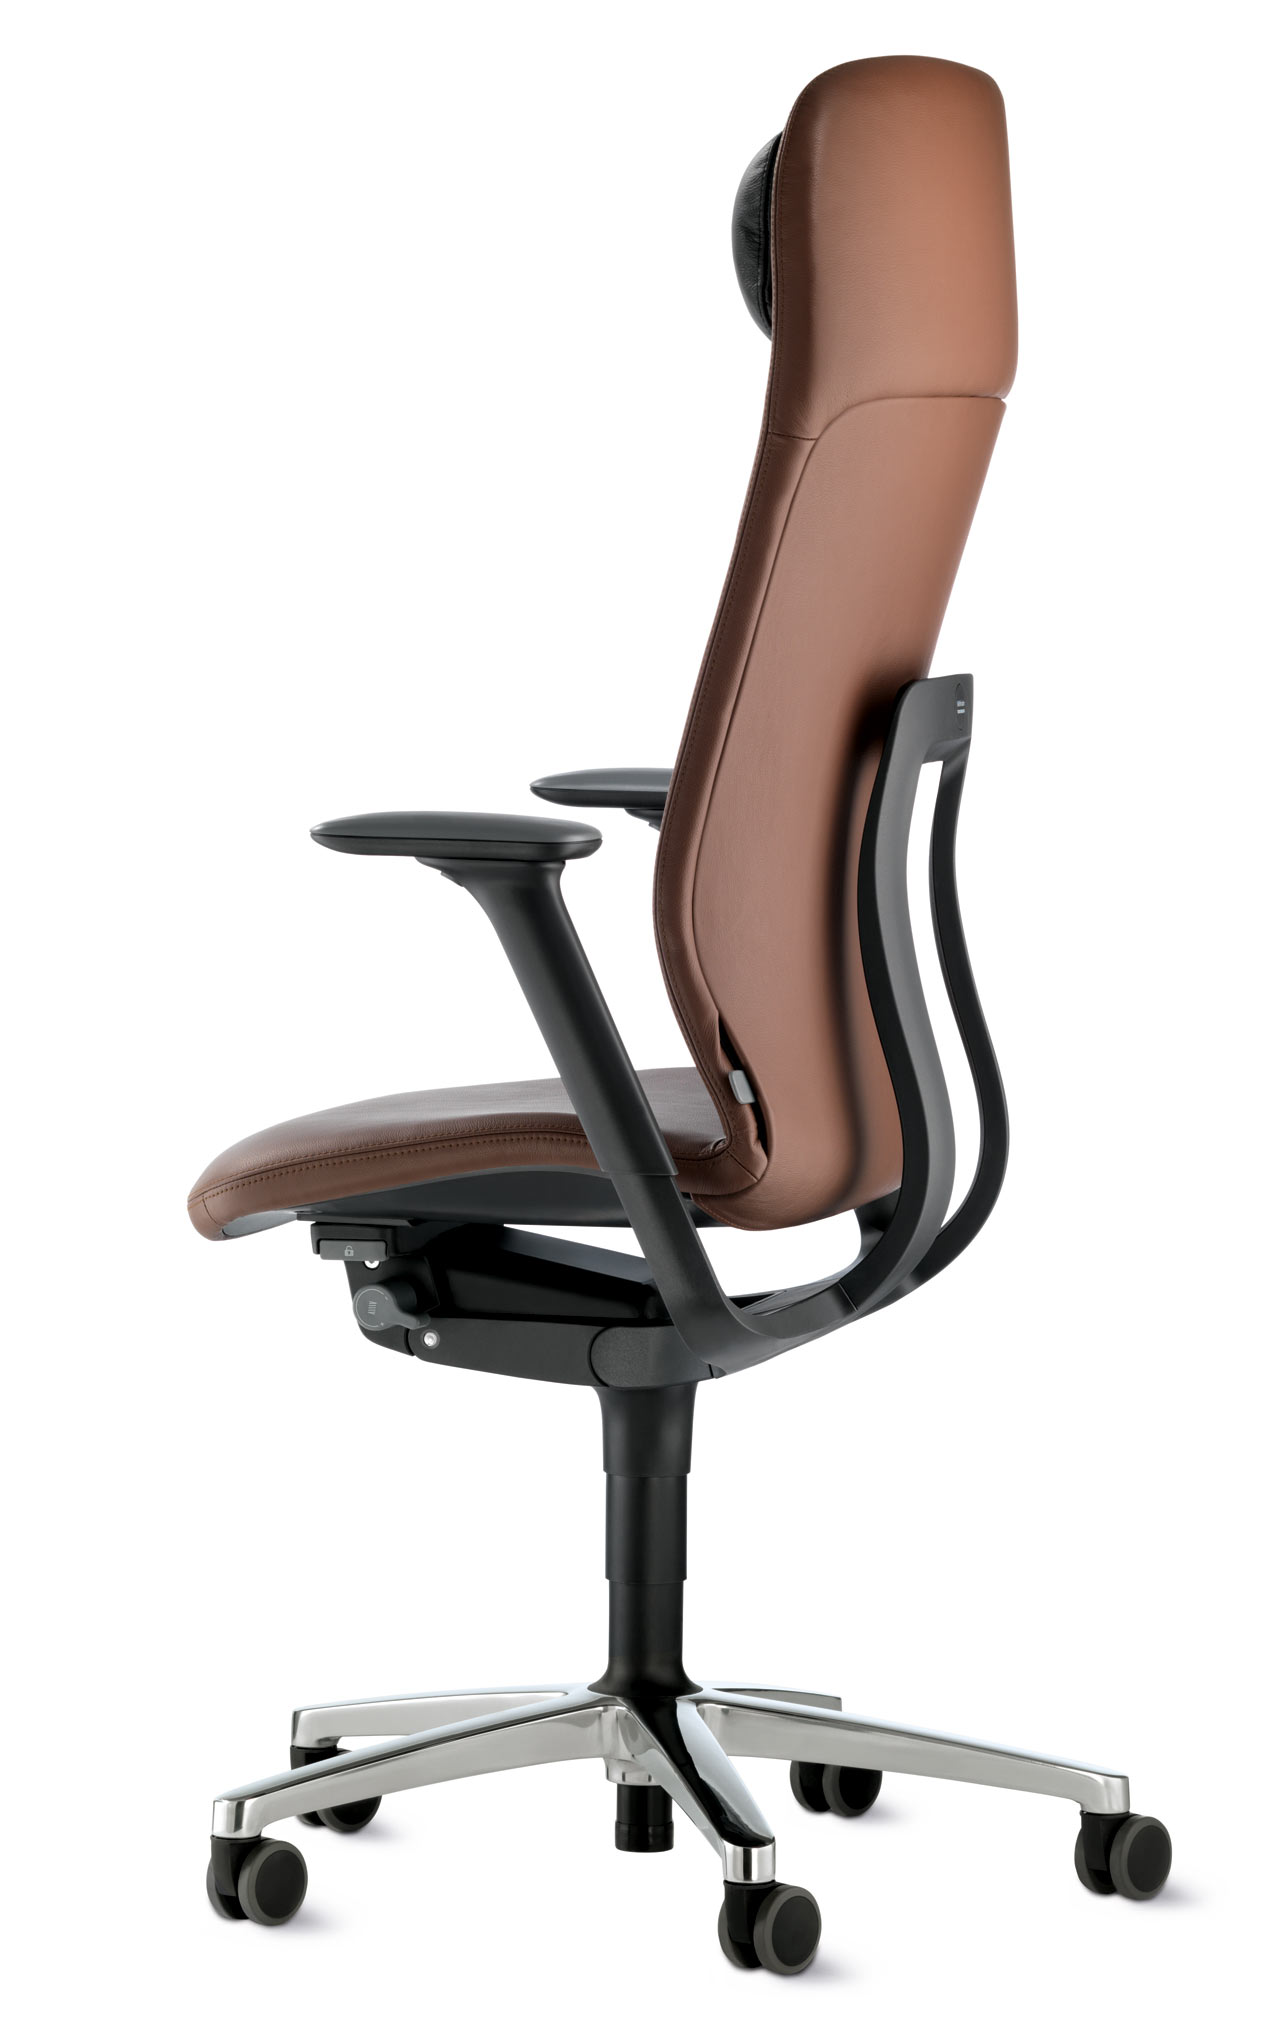 Wilkahn AT 187 chair promotes dynamic sitting to prevent backaches